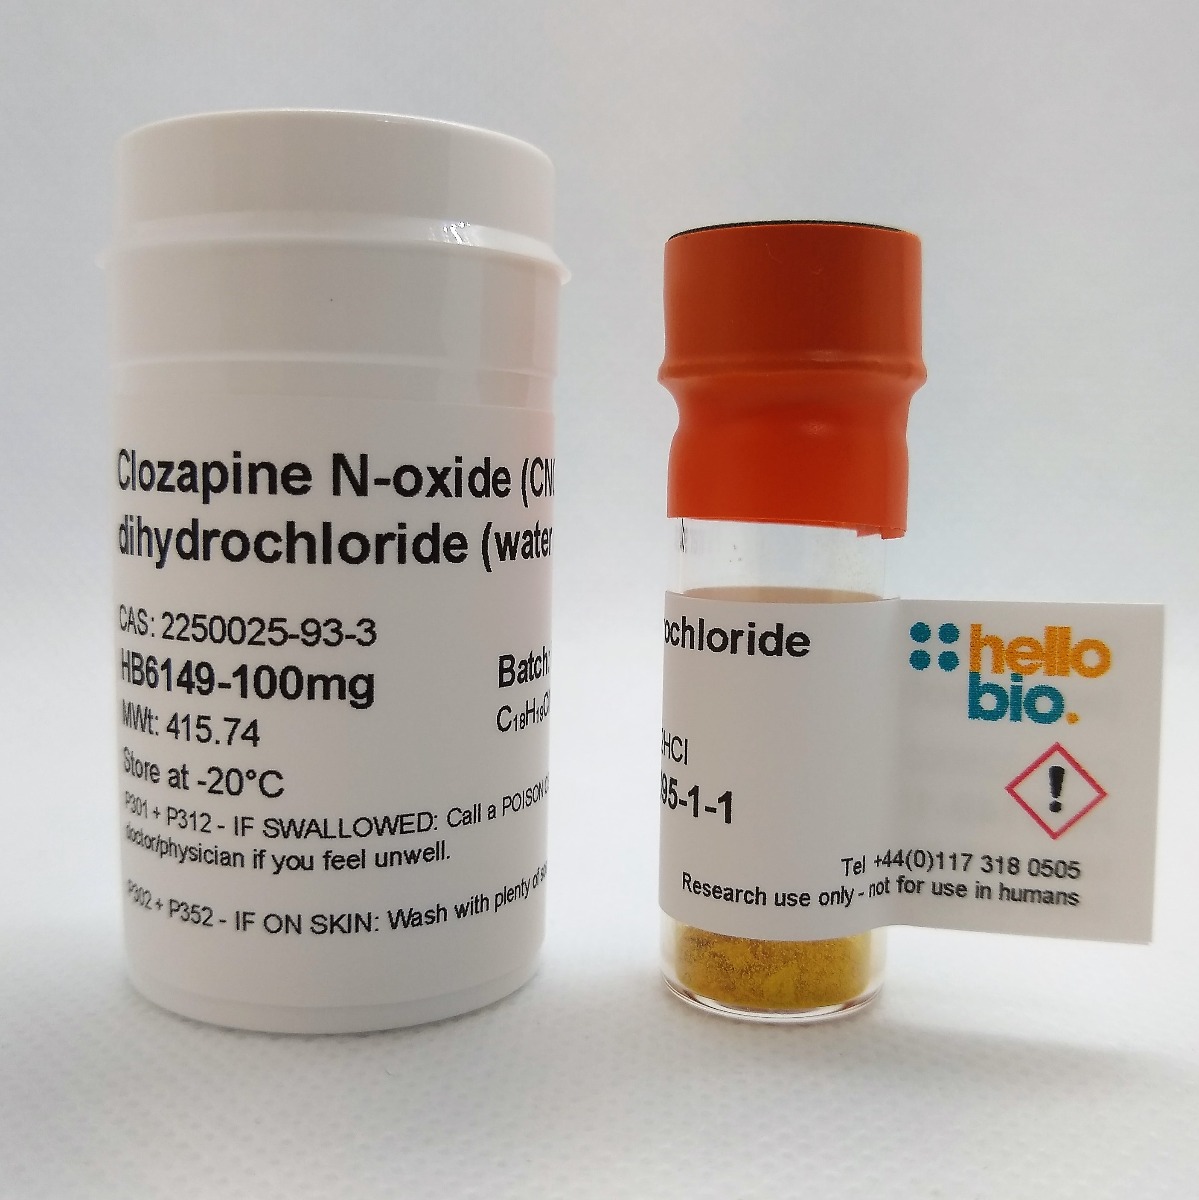 Clozapine N-oxide (CNO) dihydrochloride (water soluble) product vial image | Hello Bio